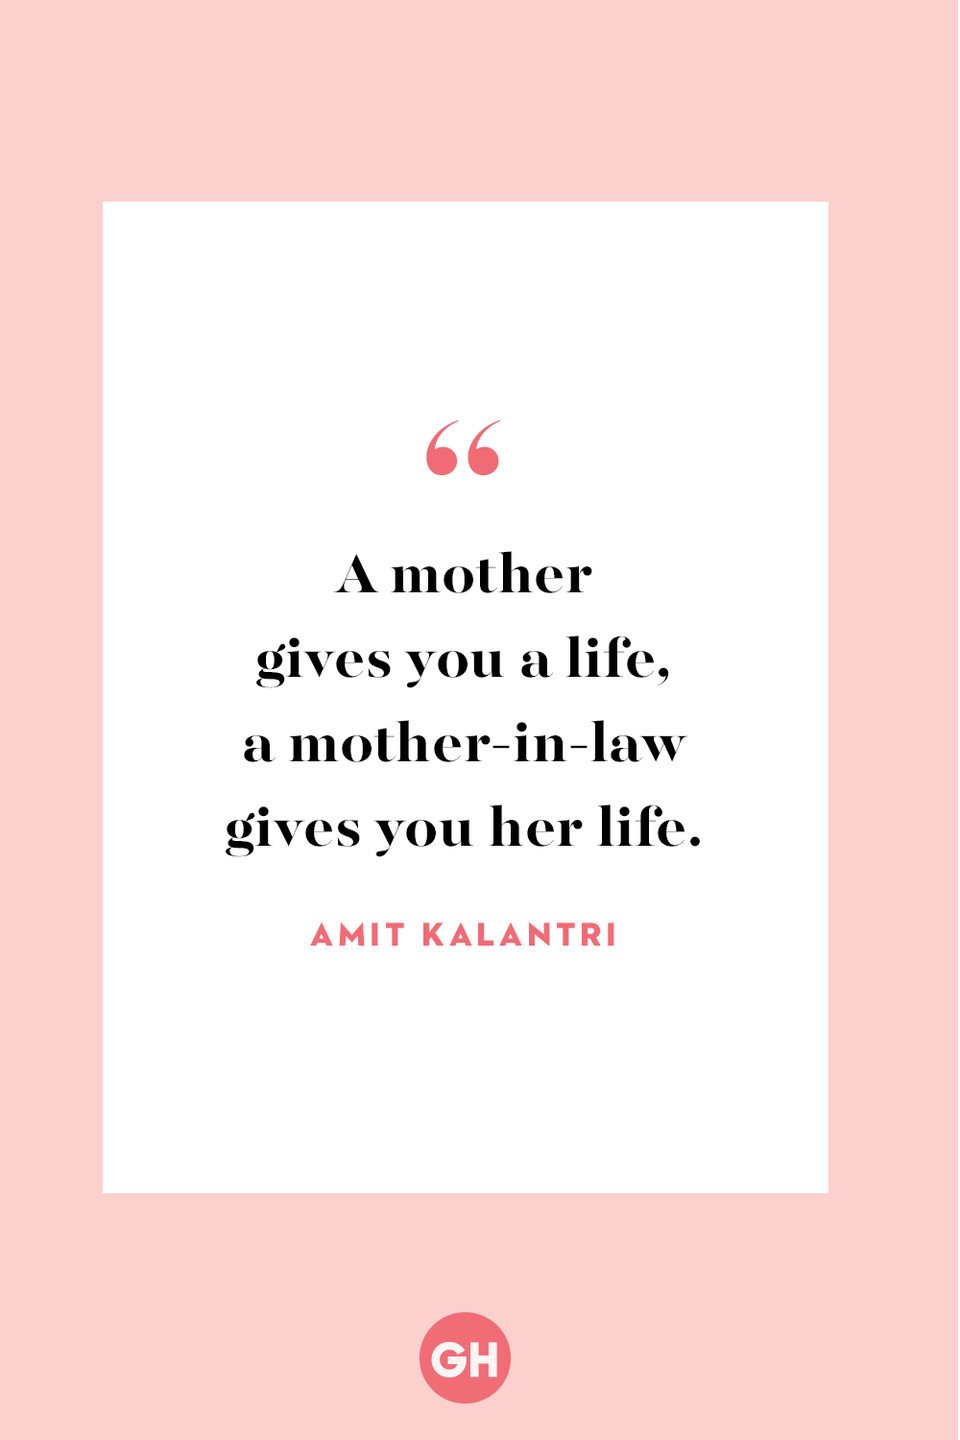 Quotes About Mothers In Law
 20 Quotes to Help You Express Just How Much You Appreciate